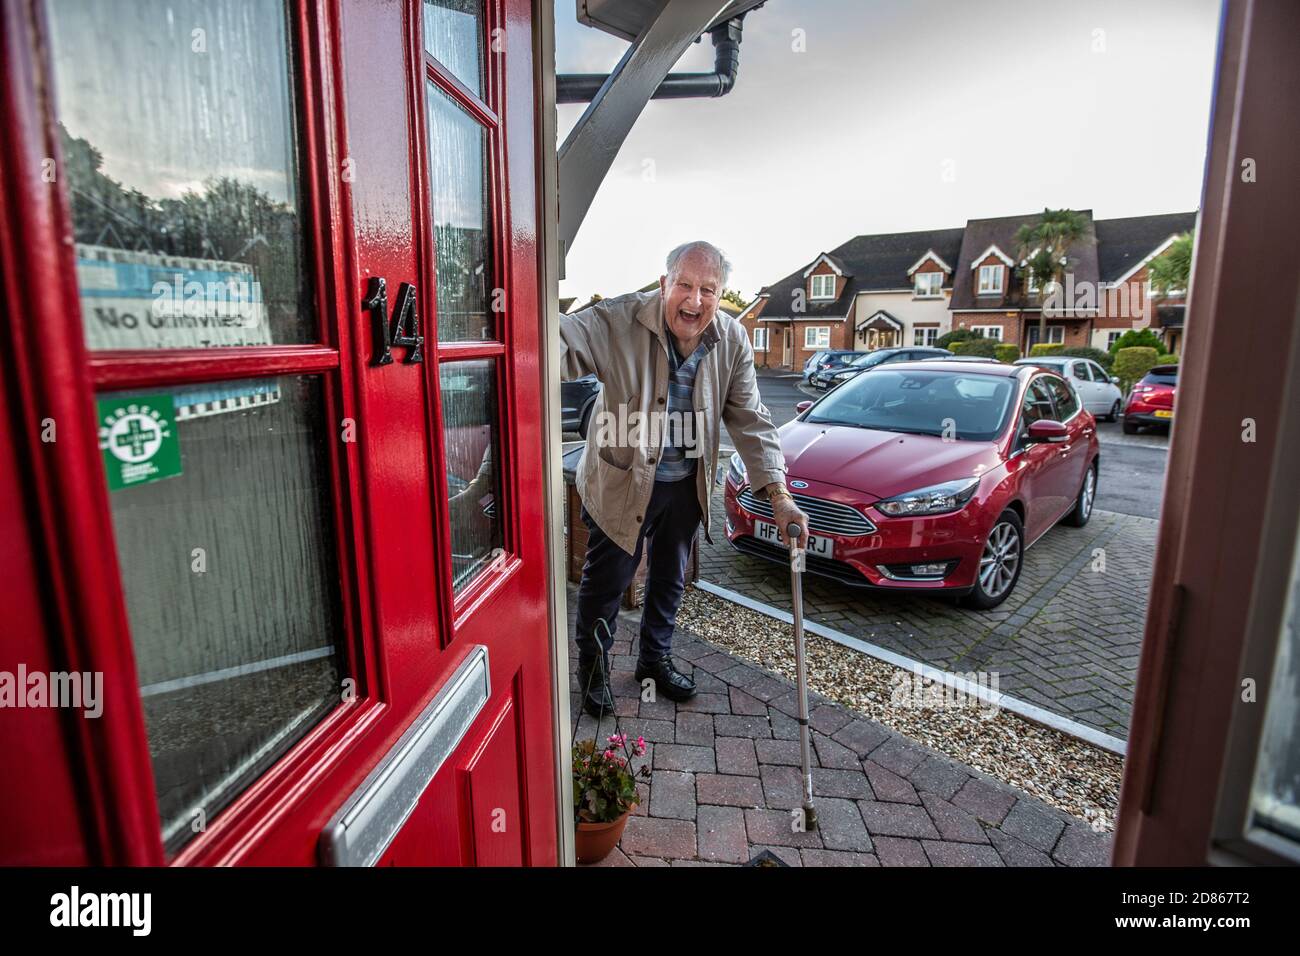 Elderly man in his 80's entering his home using a walking aid, Dorset, Southwest England, United Kingdom Stock Photo